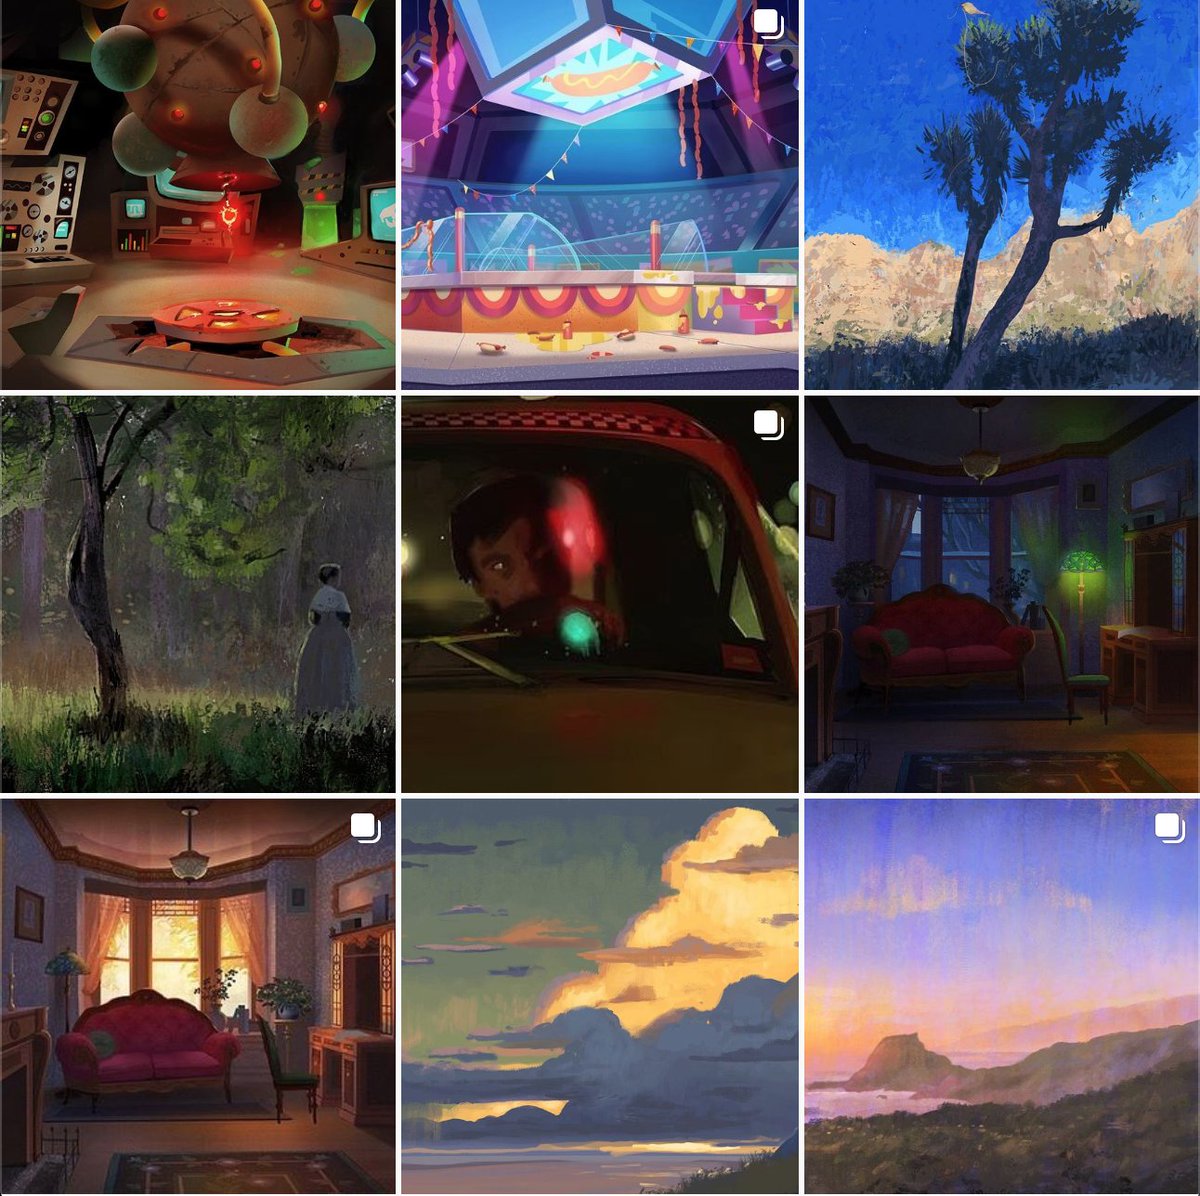  @BonnieBranson: Bonnie is a background artist whose scenes are just amazing. The details, the framing, the lighting, everything is great.  https://twitter.com/BonnieBranson  http://www.artbonnie.com/  https://www.instagram.com/artbonnie/ 